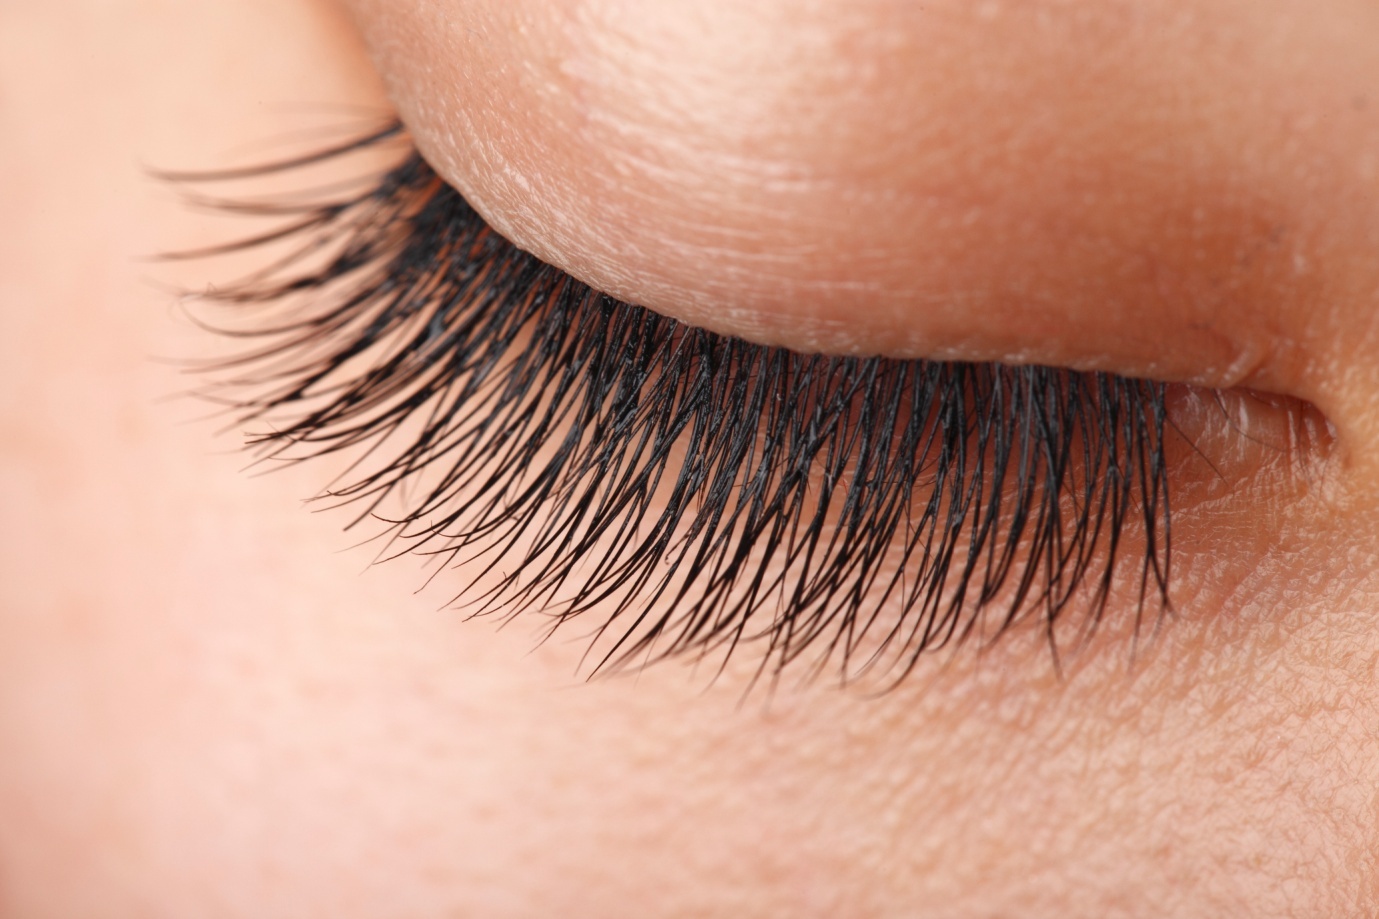 Have some Patience- Grow and Care Your Eyelashes